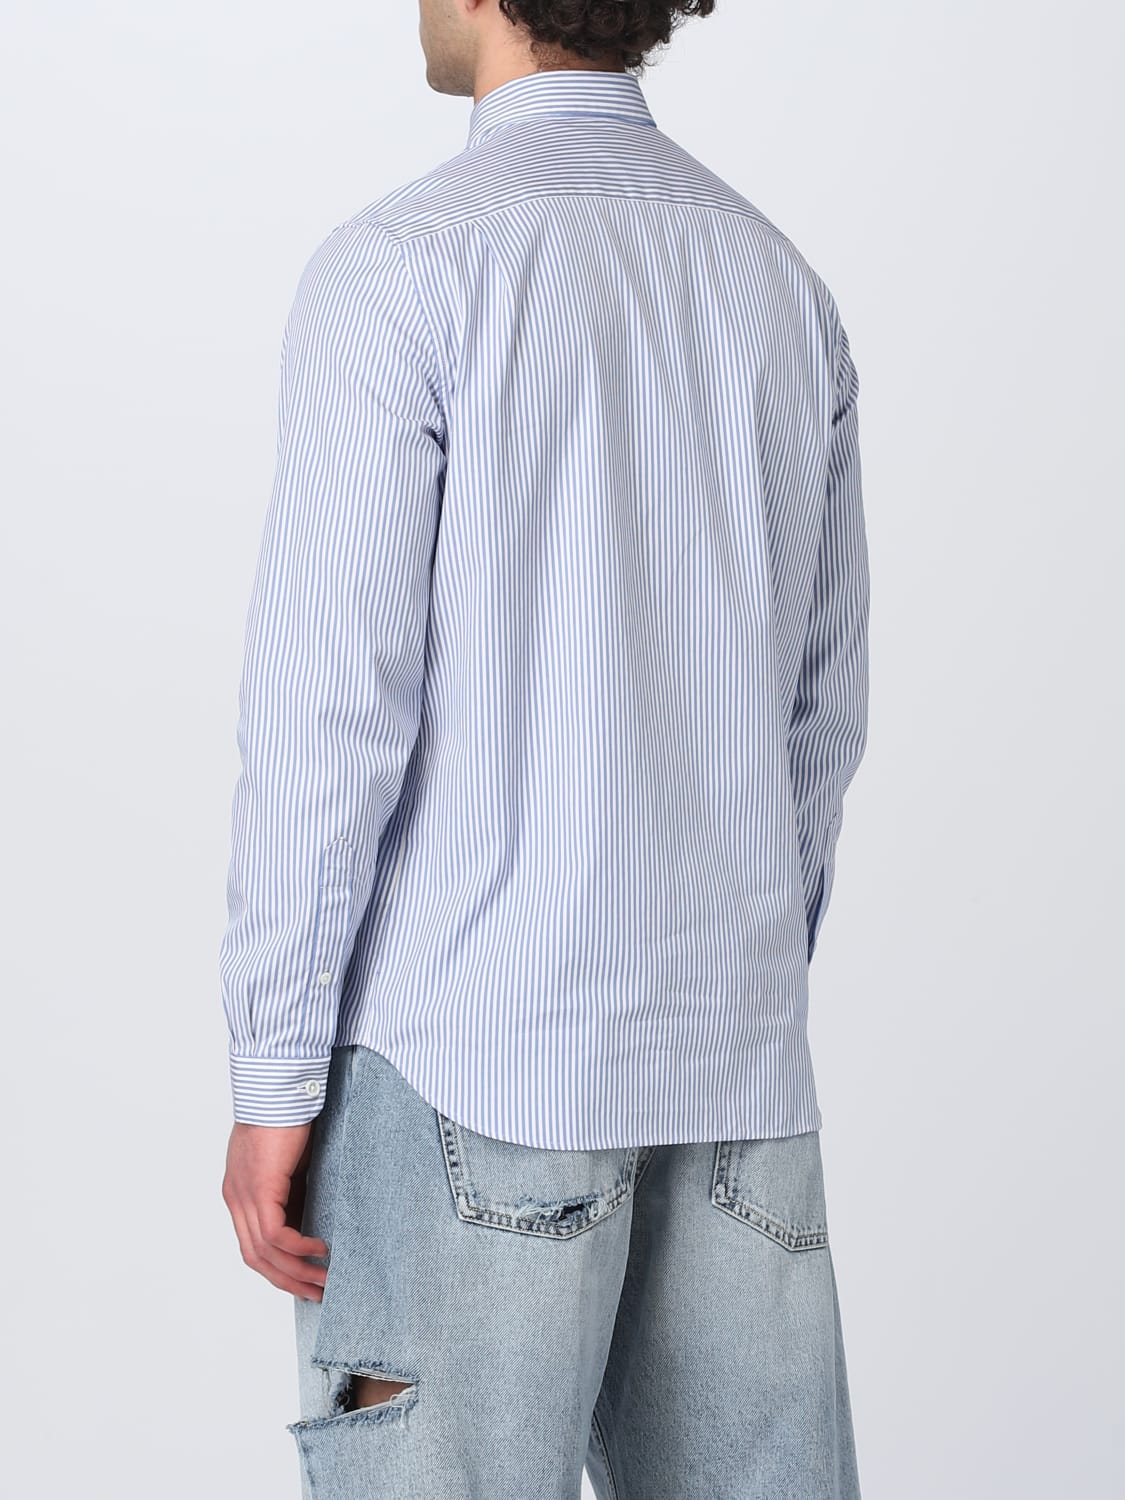 LACOSTE: shirt for man - Sky Blue | Lacoste shirt CH2936 online on ...